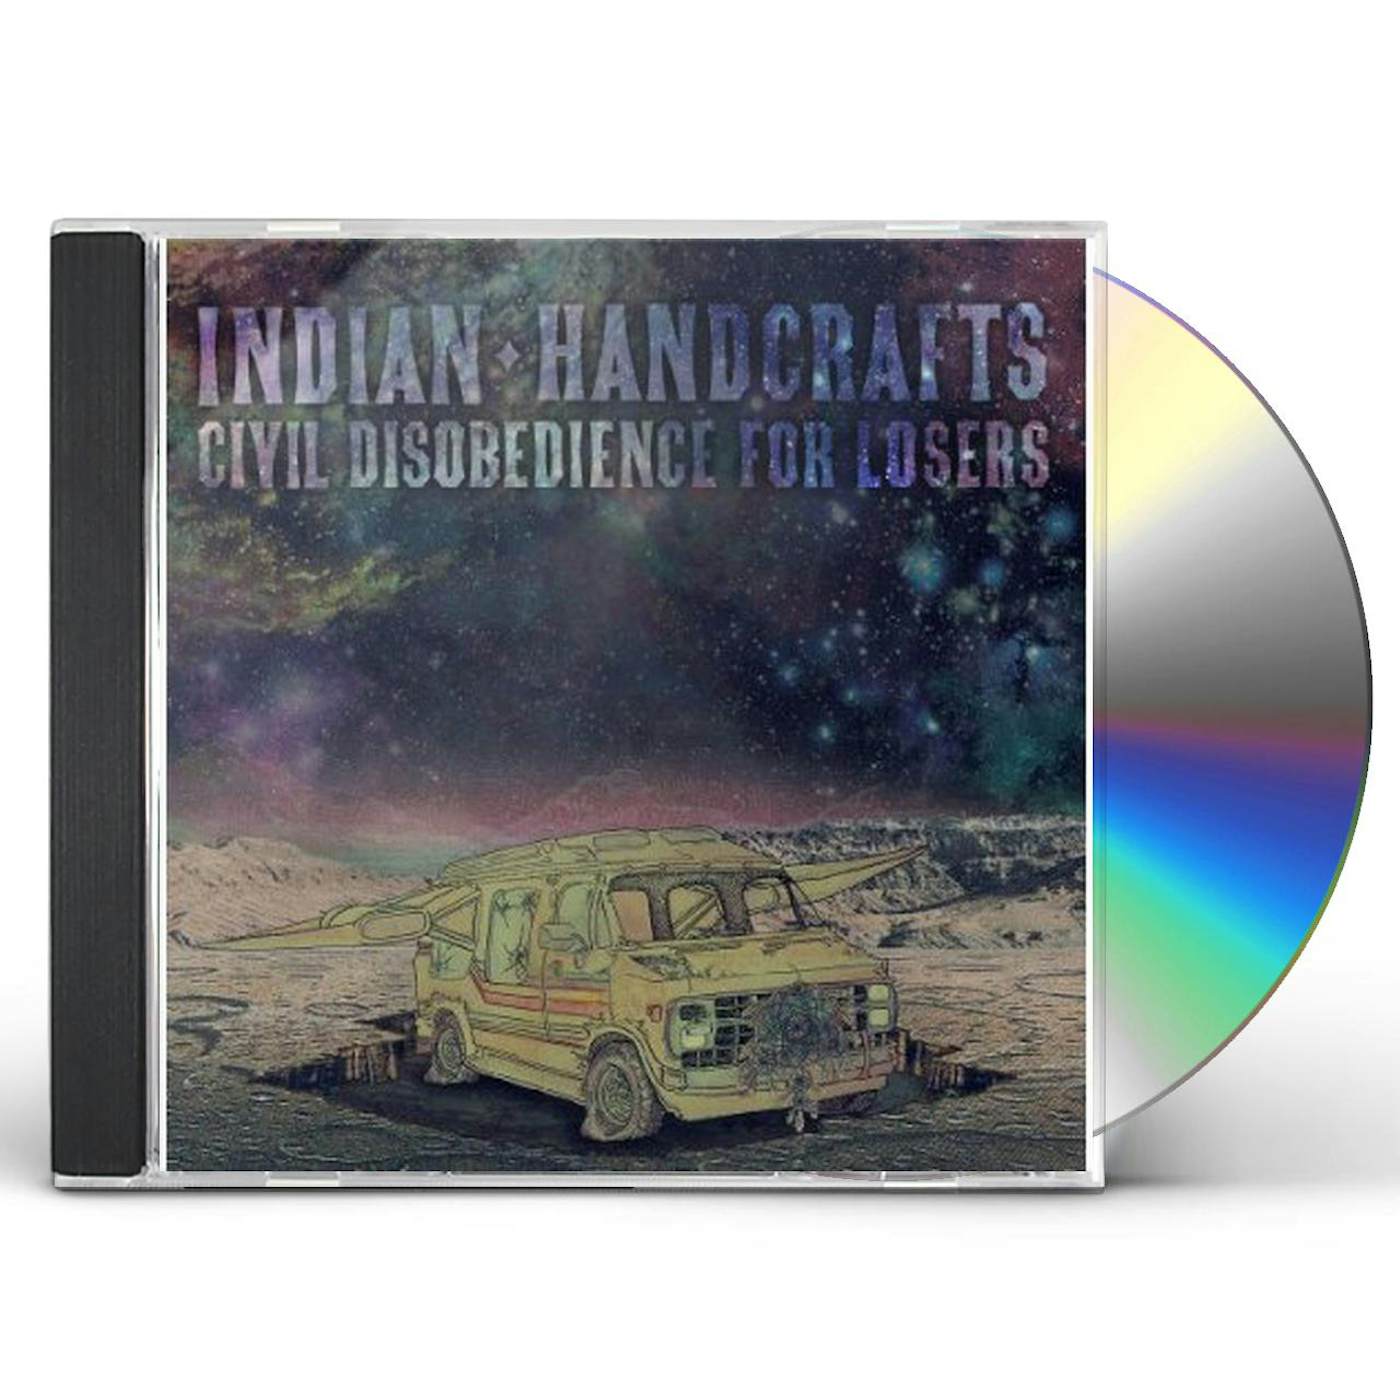 Indian Handcrafts CIVIL DISOBEDIENCE FOR LOSERS CD